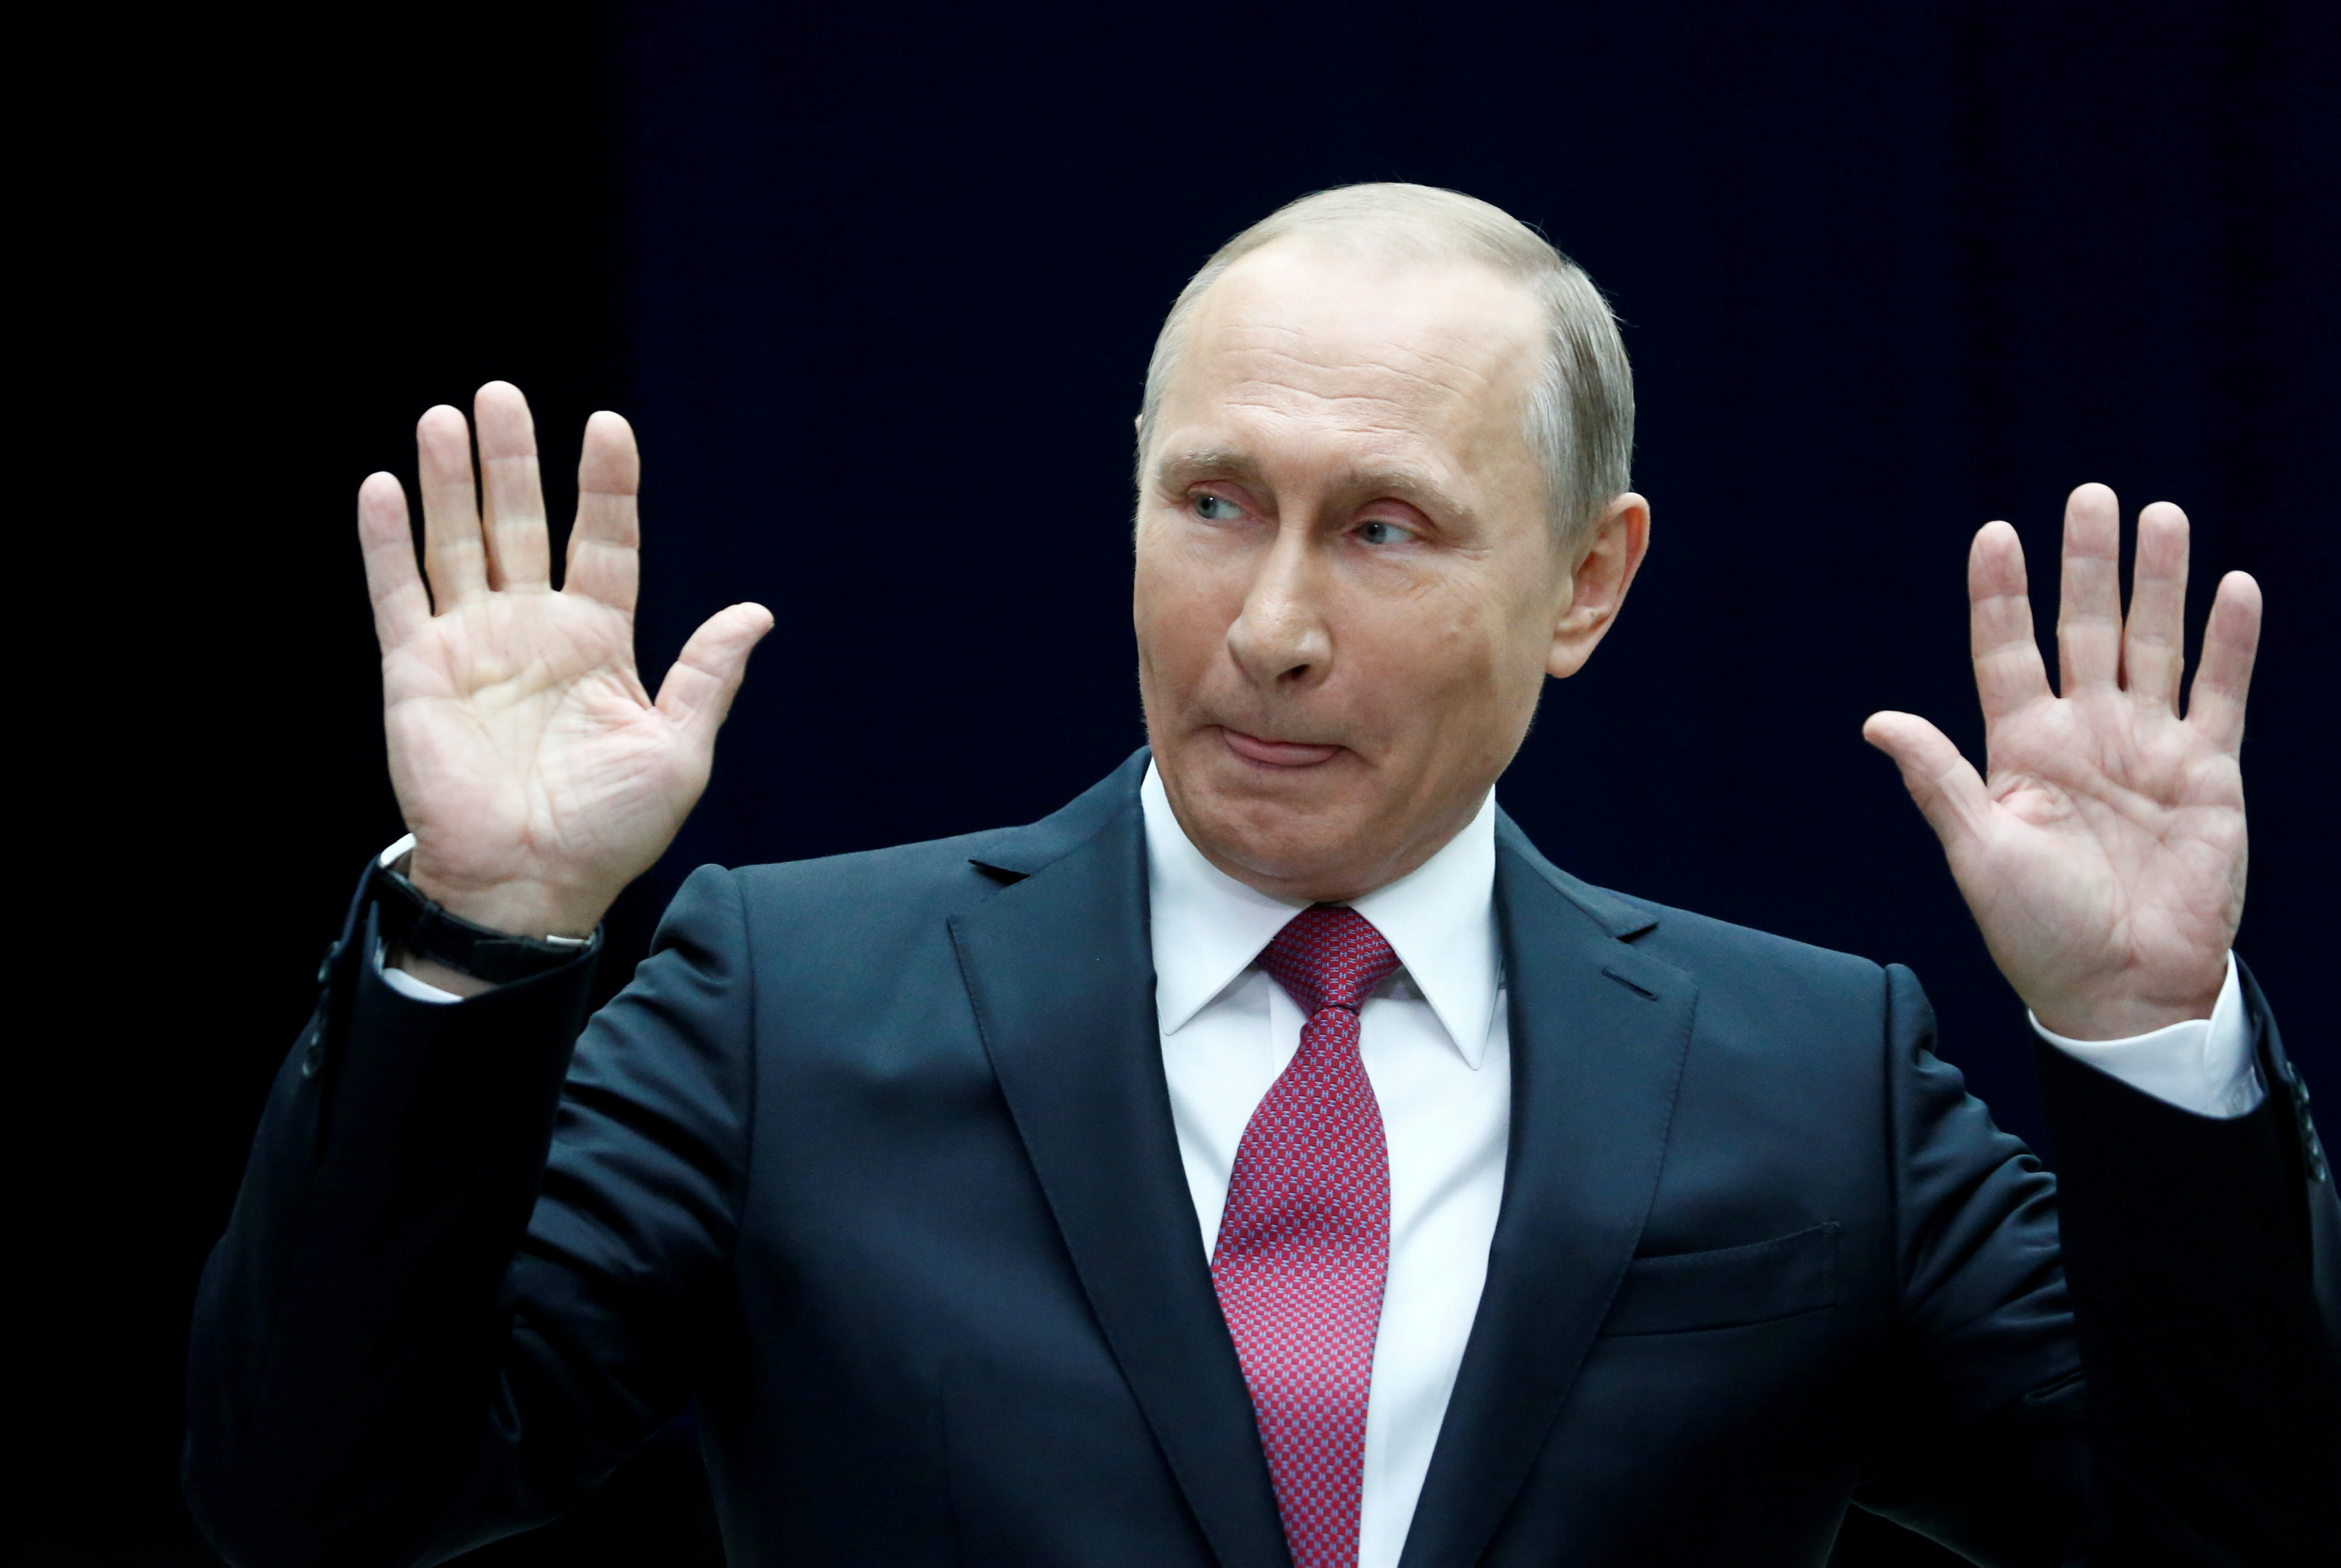 Russian President Putin gestures as he speaks to journalists following a live nationwide broadcast call-in in Moscow